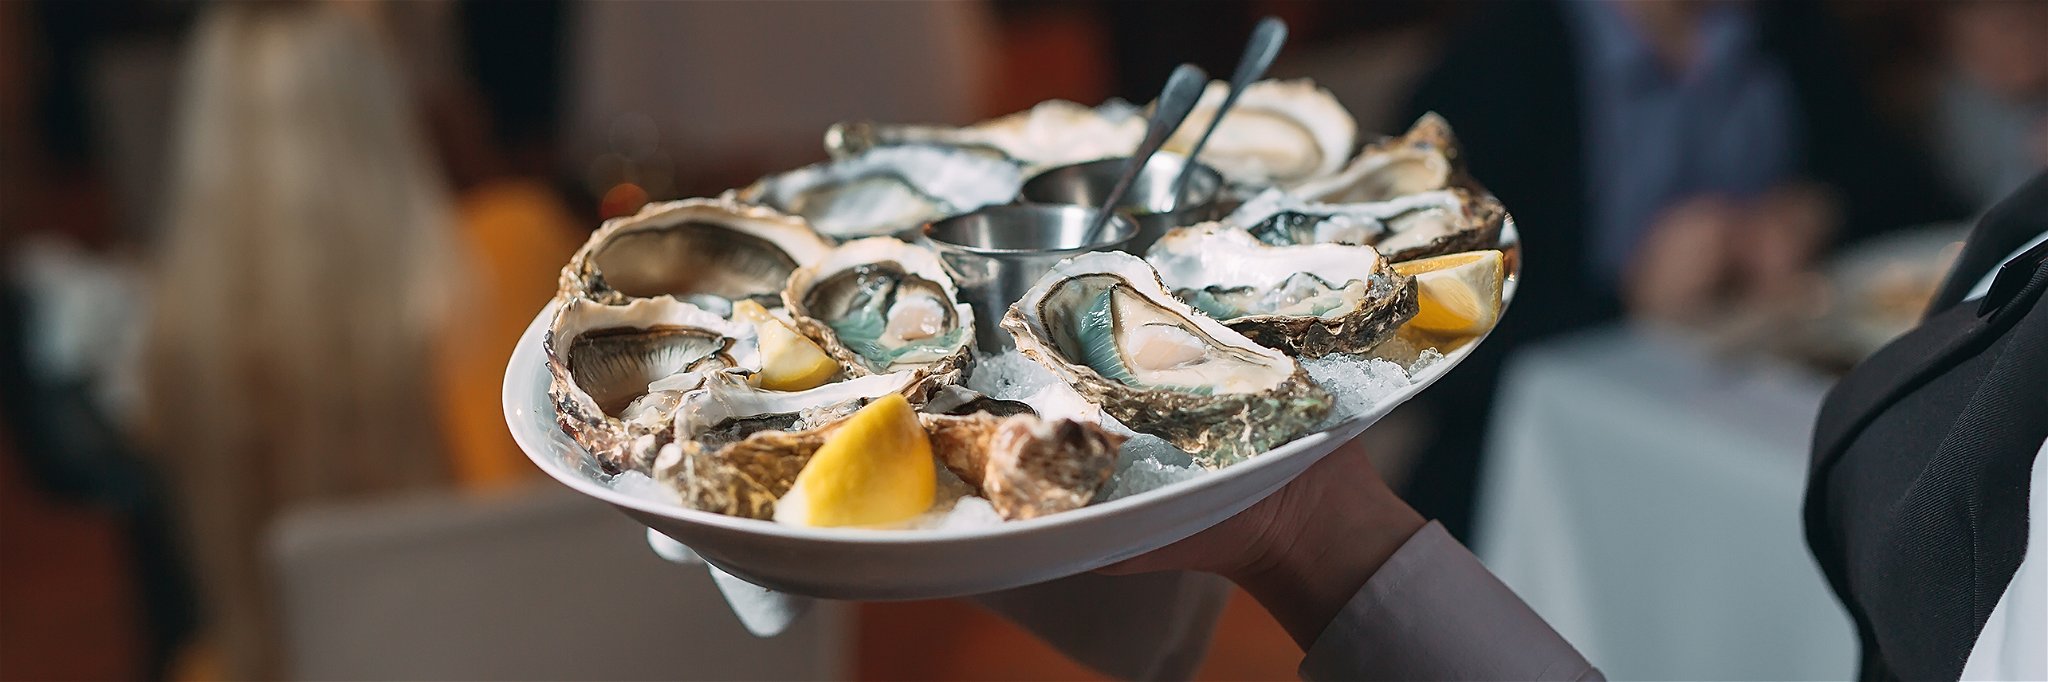 Falstaff found the best places to enjoy seafood in London